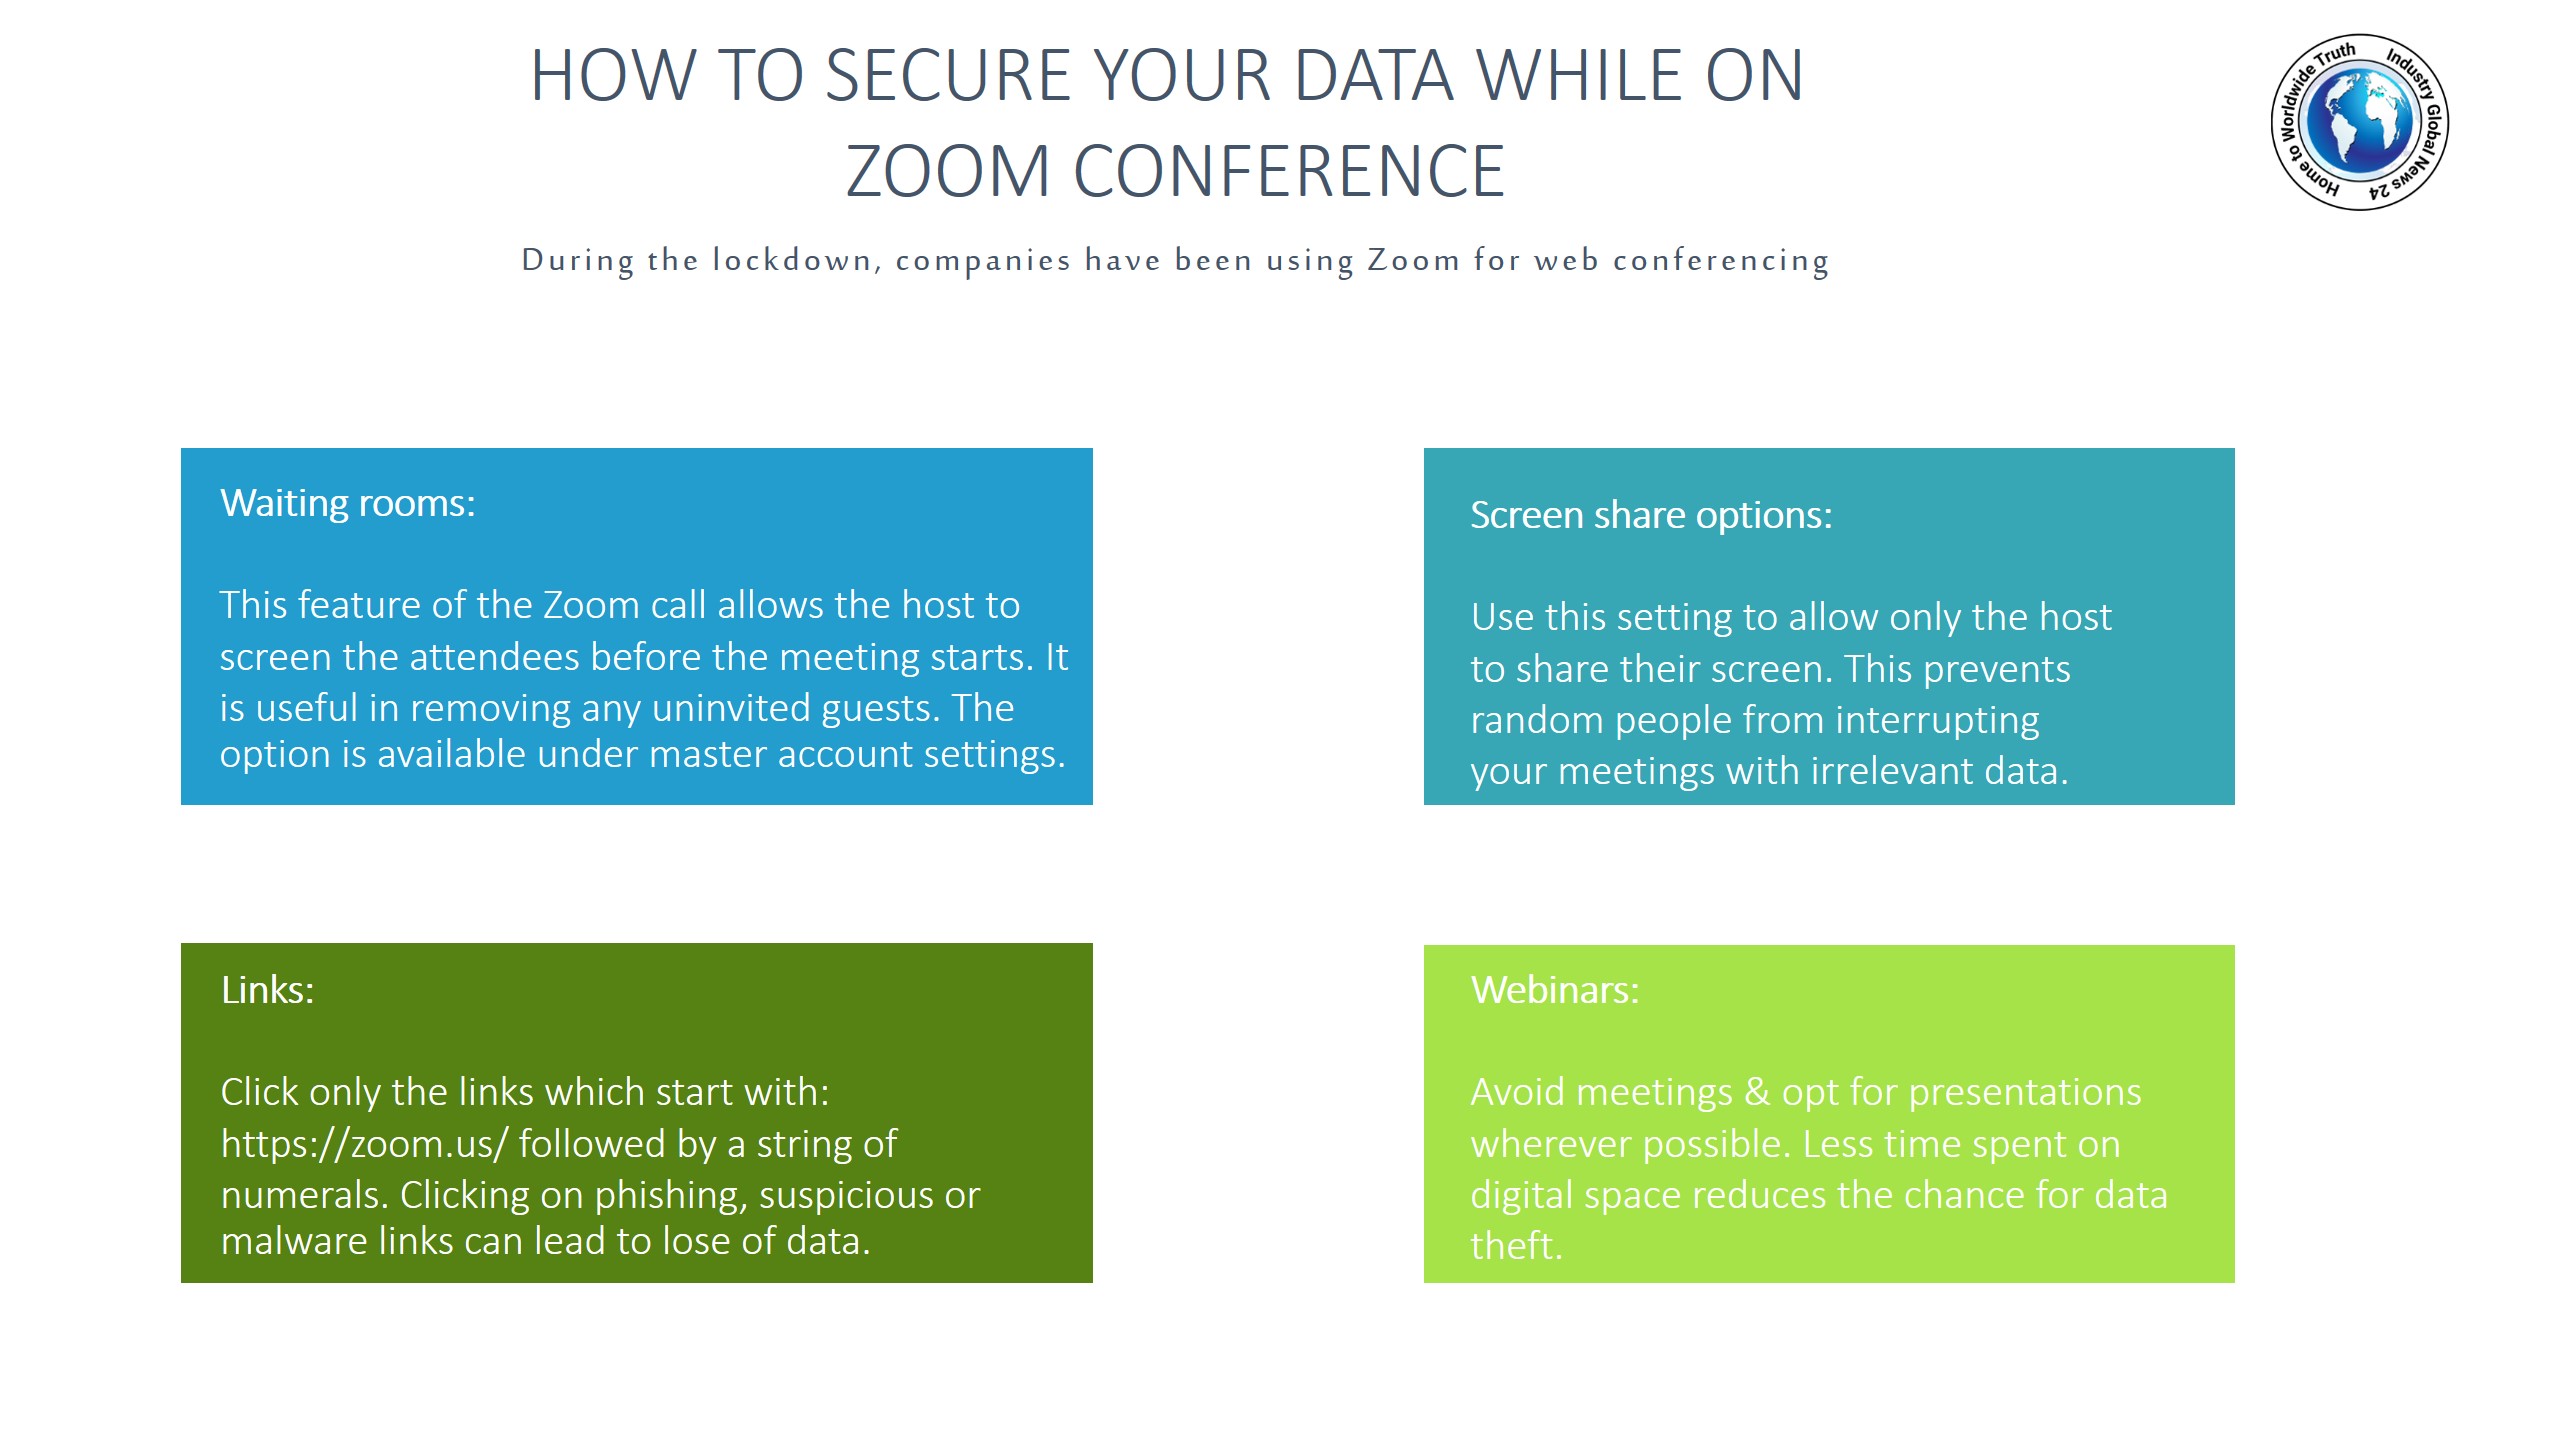 How to secure your data while on Zoom conference